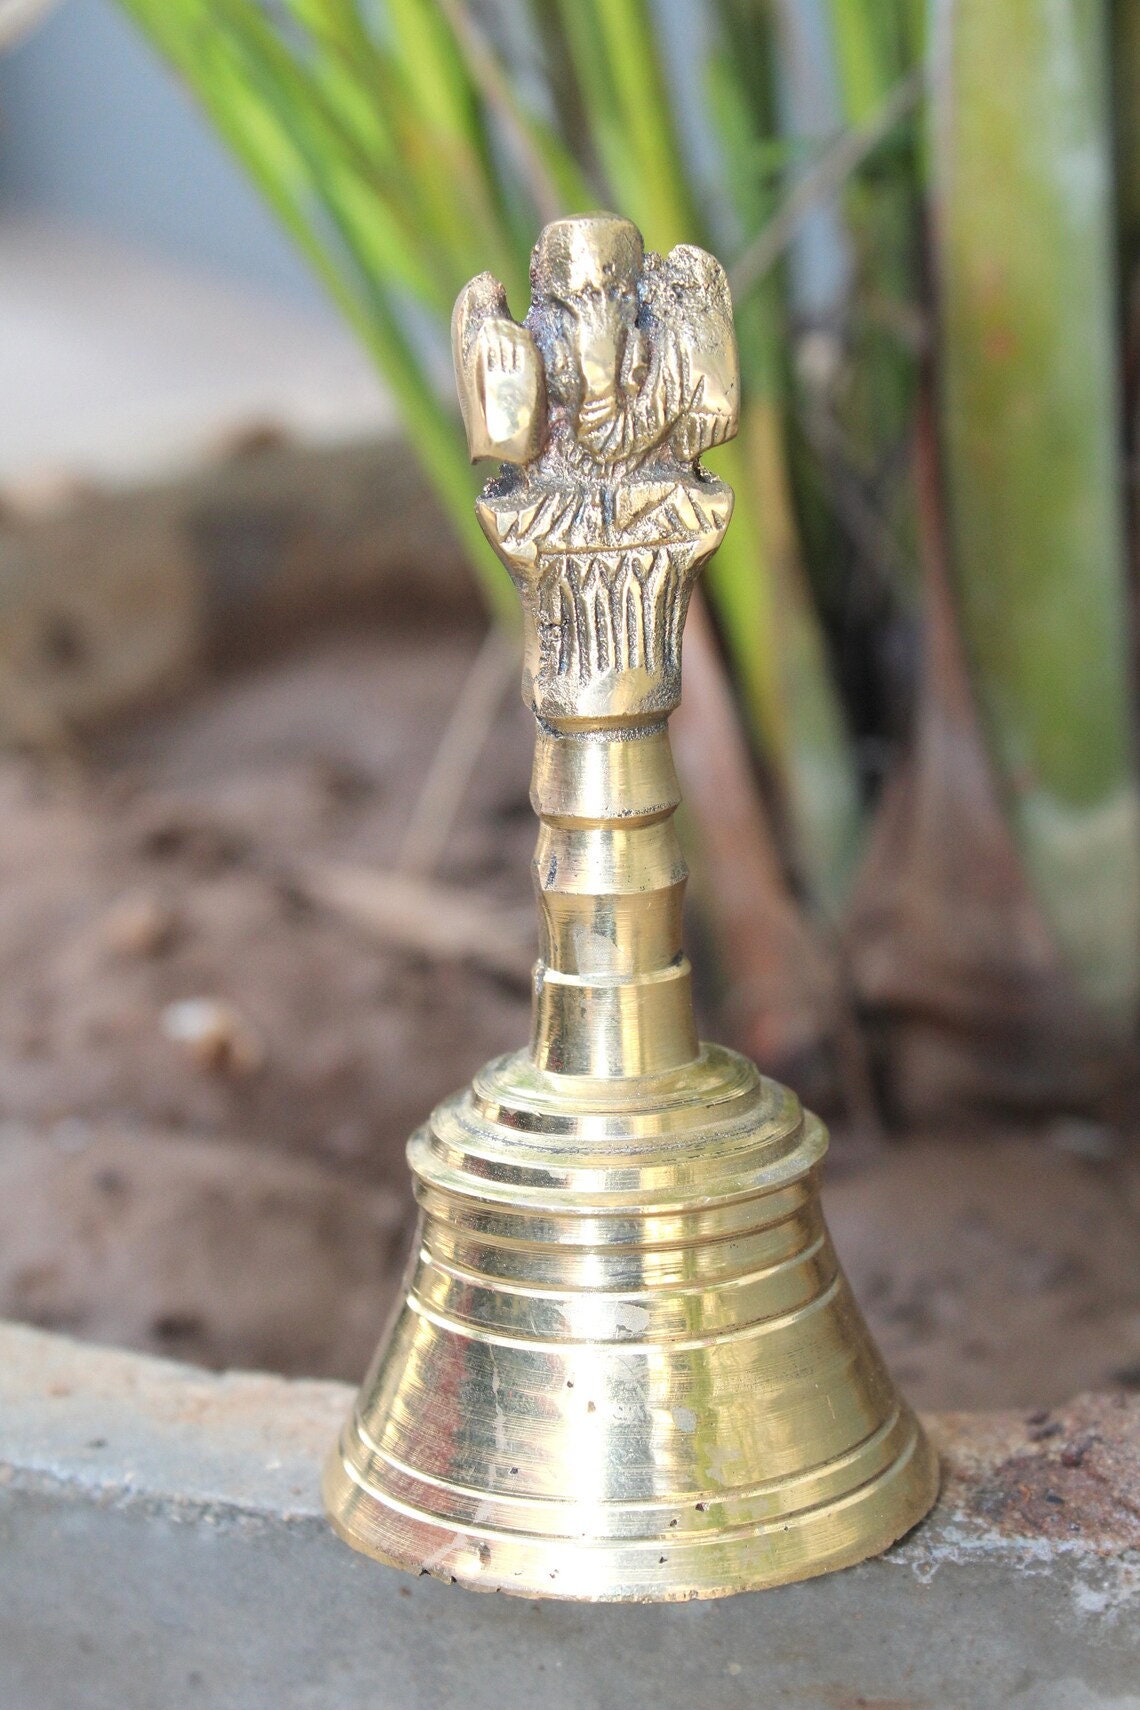 Brass Hanging Bell With Chain Indian Temple Bell Decorative Small Bell for  Temple, Mandir, Altar, Shrine Engraved Meenakari Worked Bells 